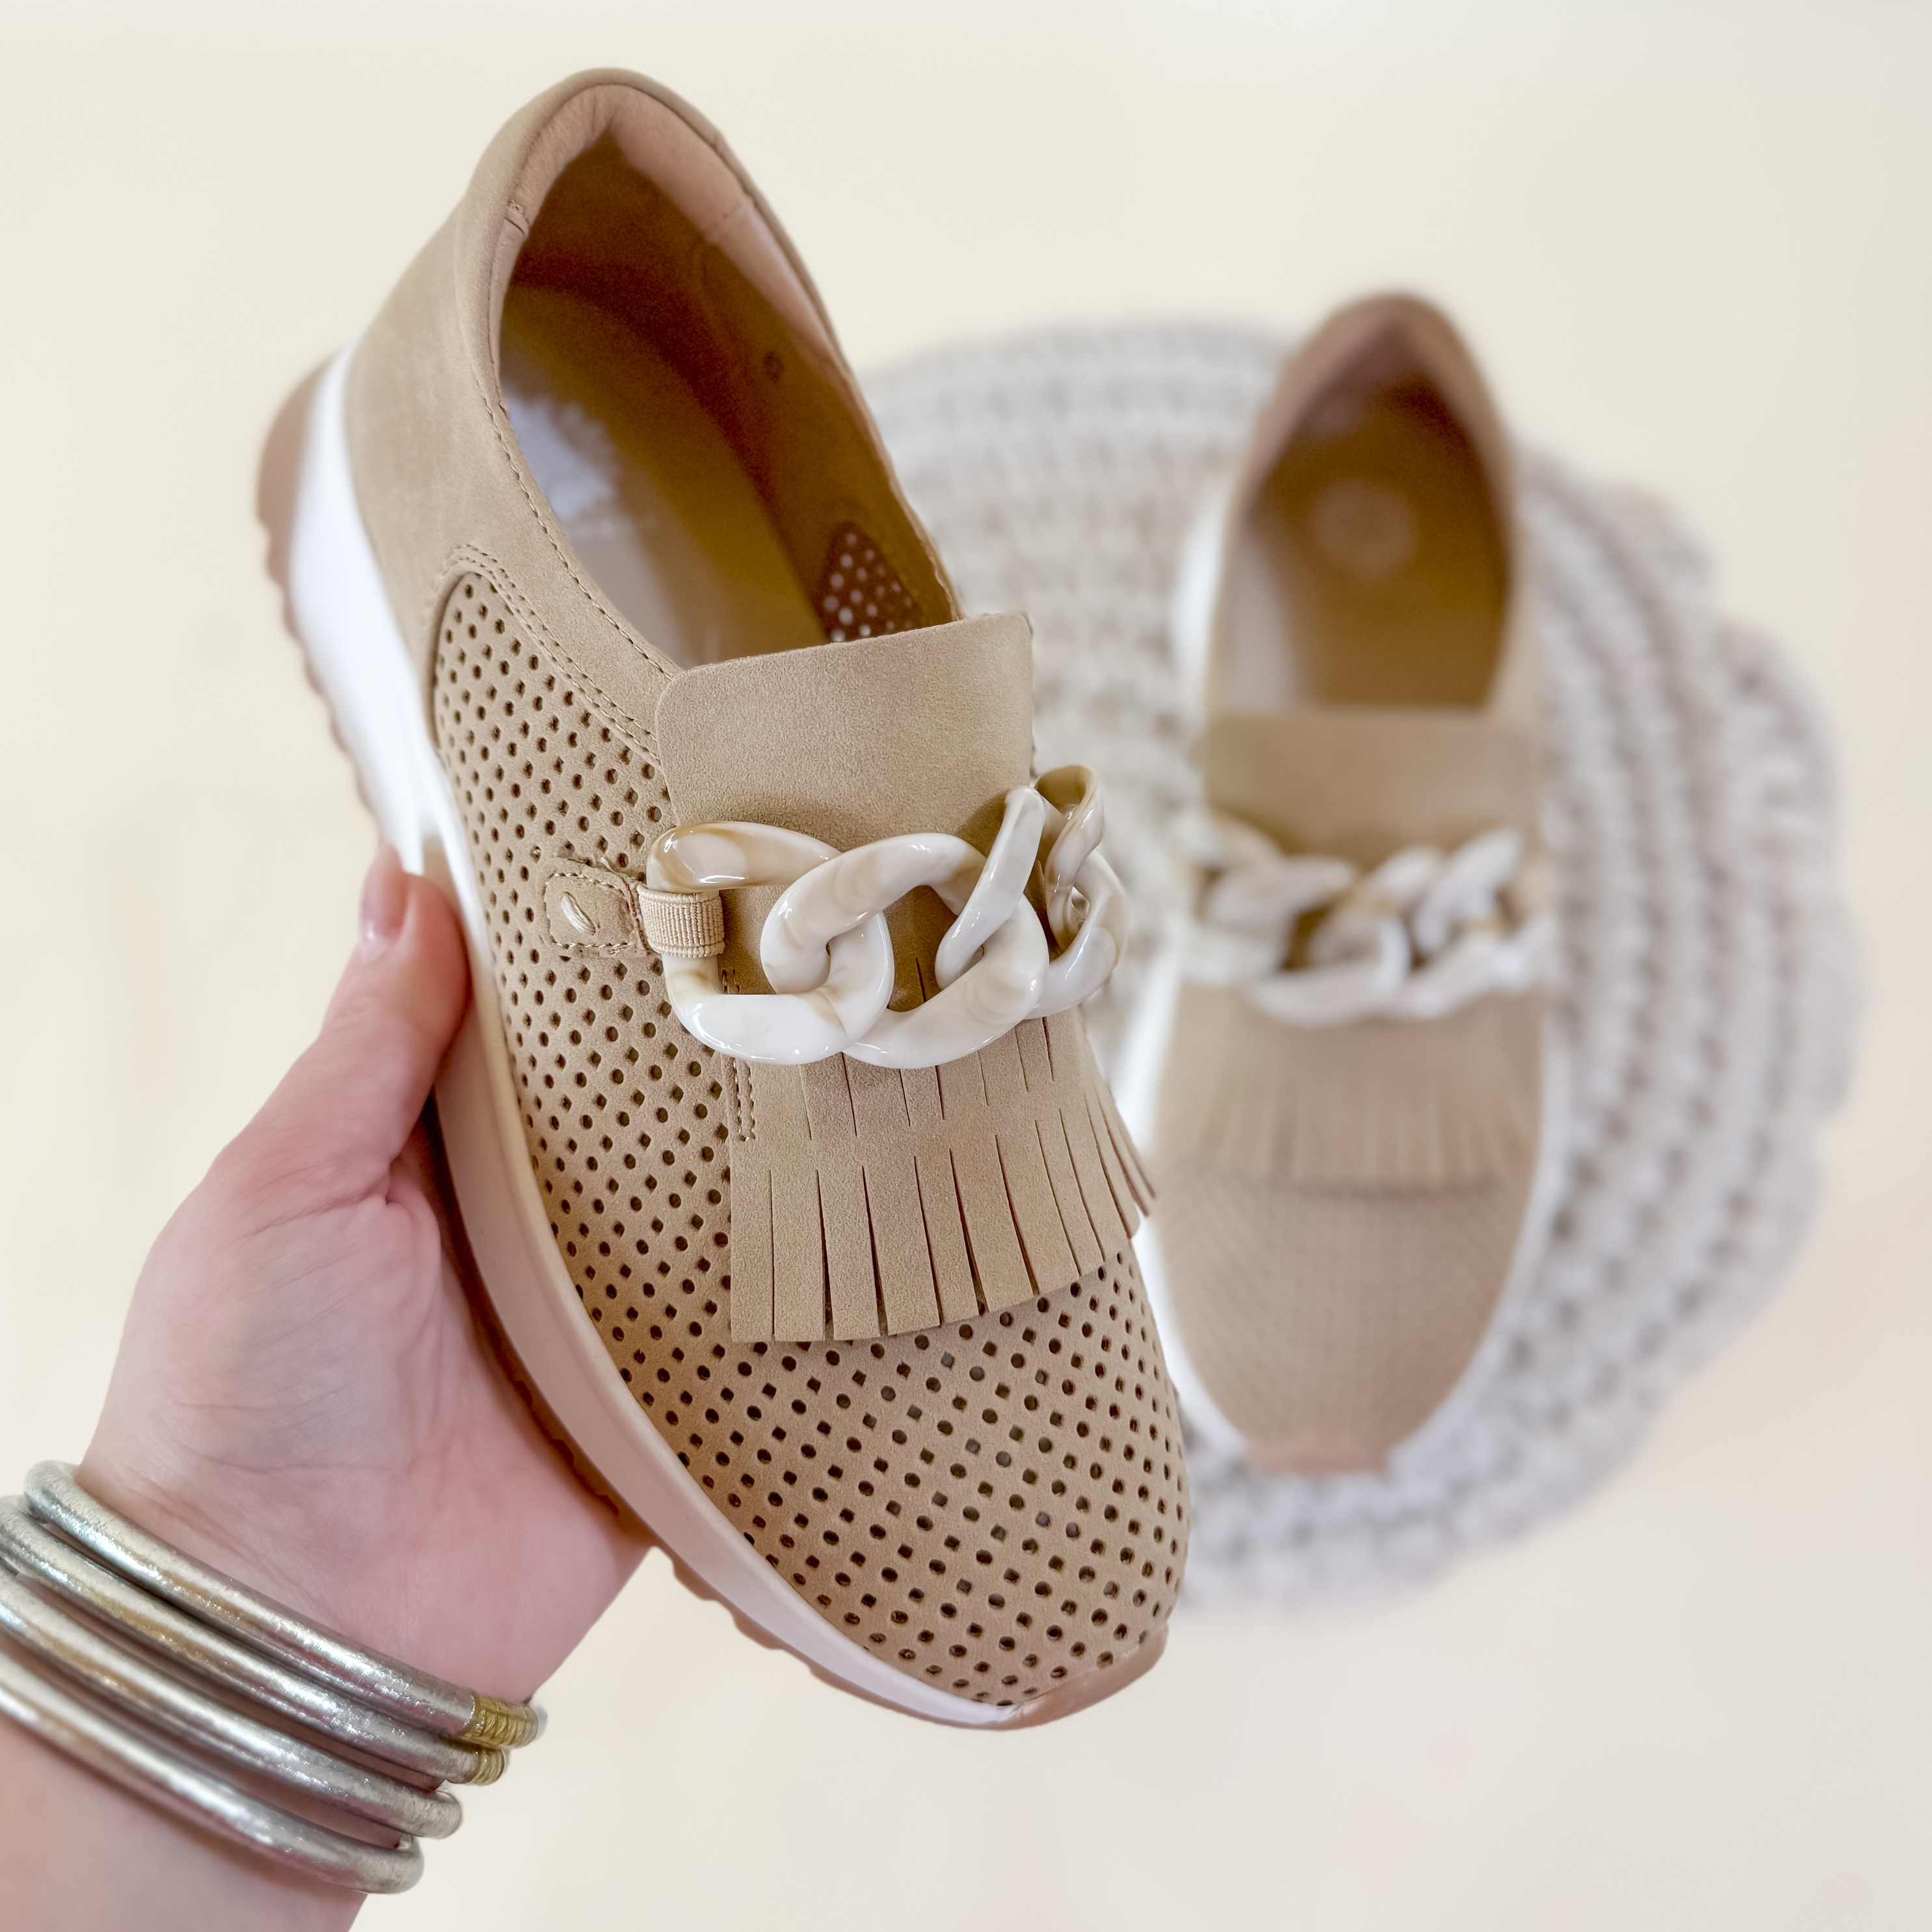 Yellowbox | Riska Slip-on Loafer in Sand - Giddy Up Glamour Boutique